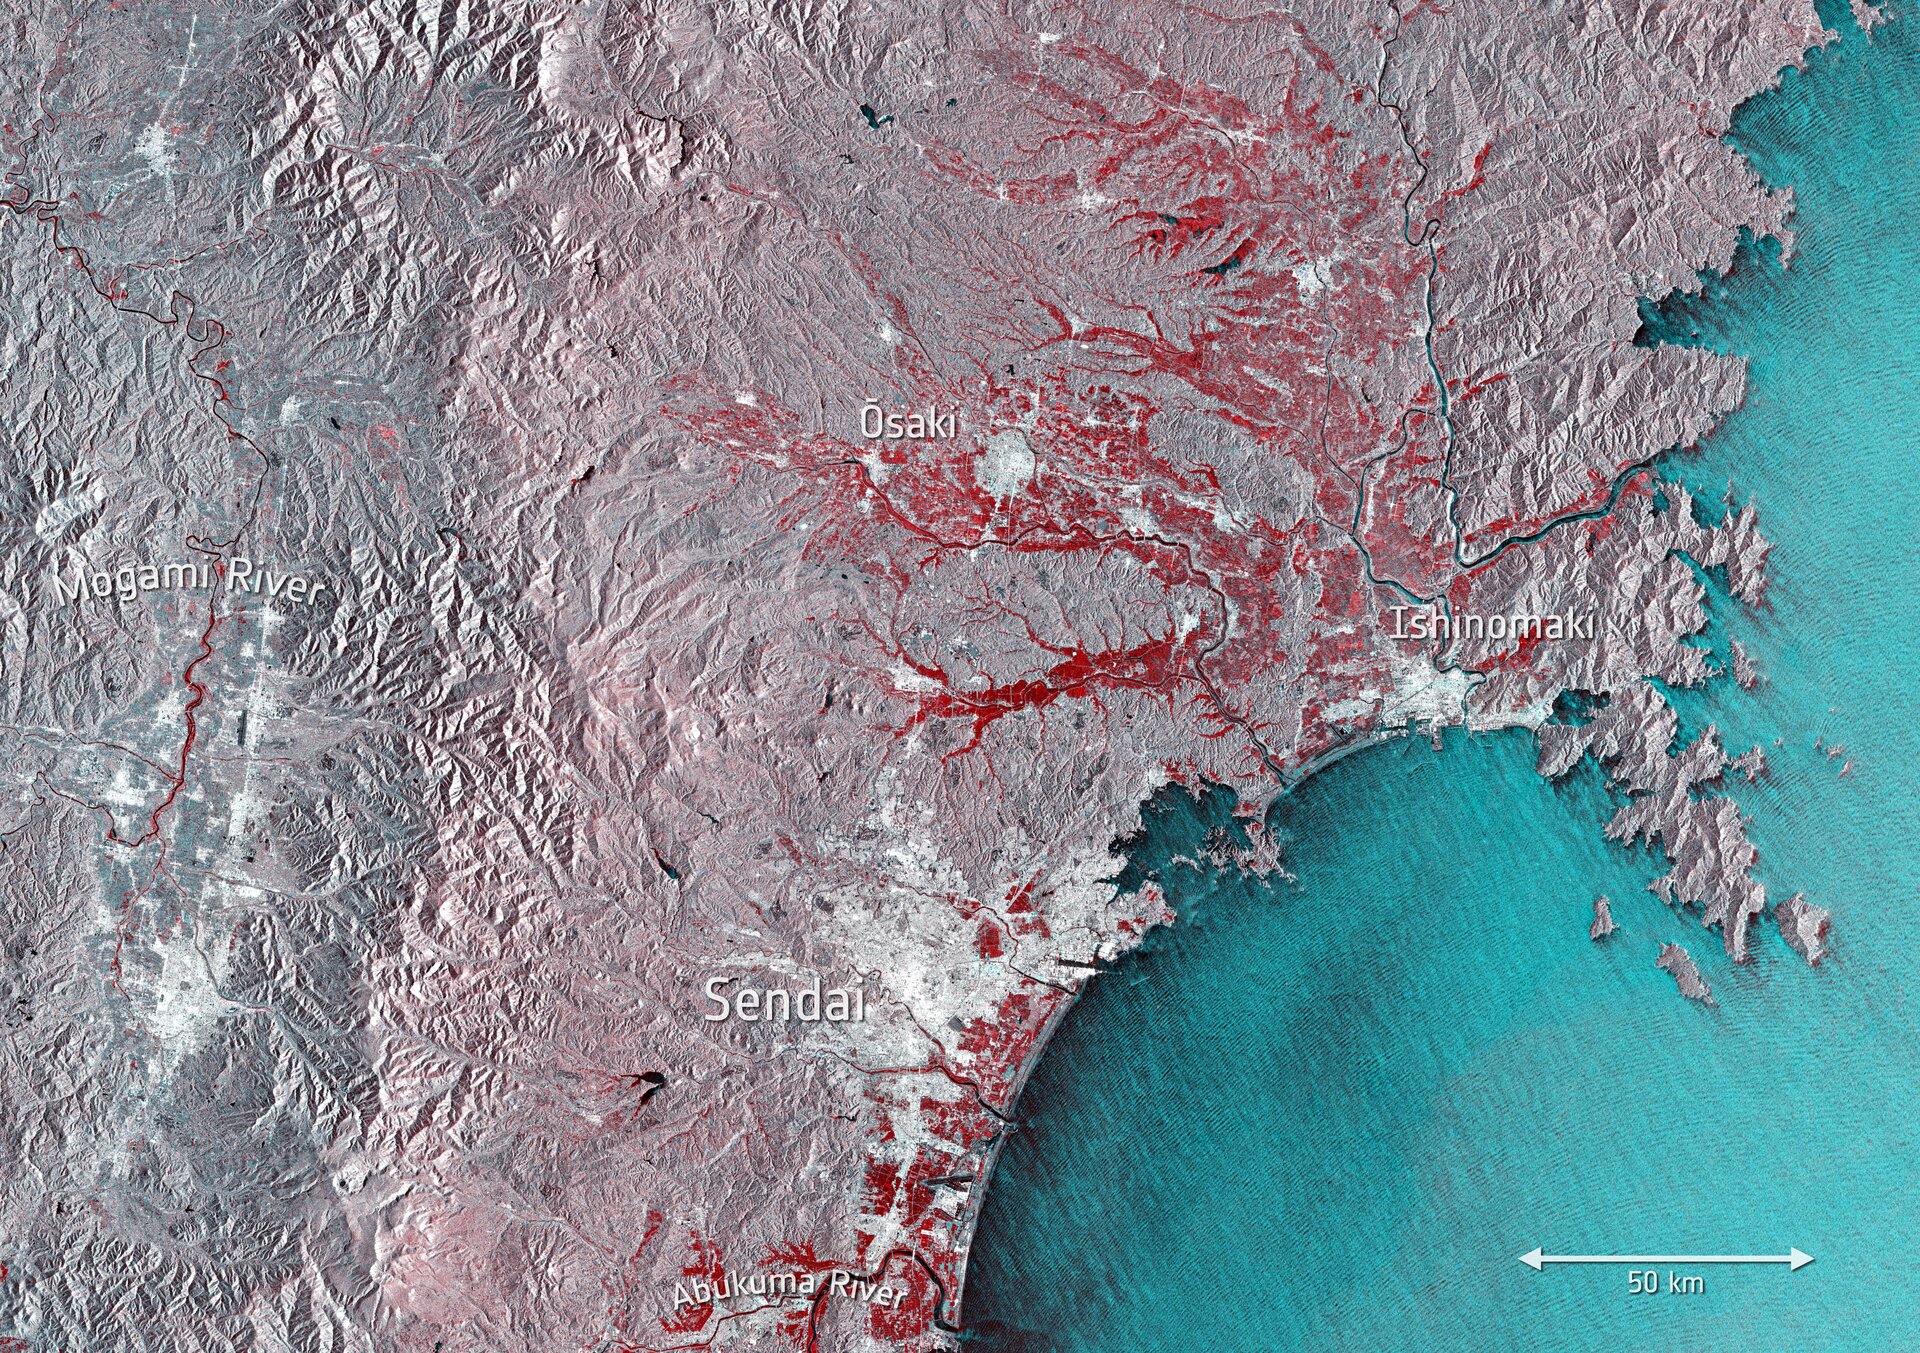 Floods northeast of Tokyo captured by the Copernicus Sentinel-1